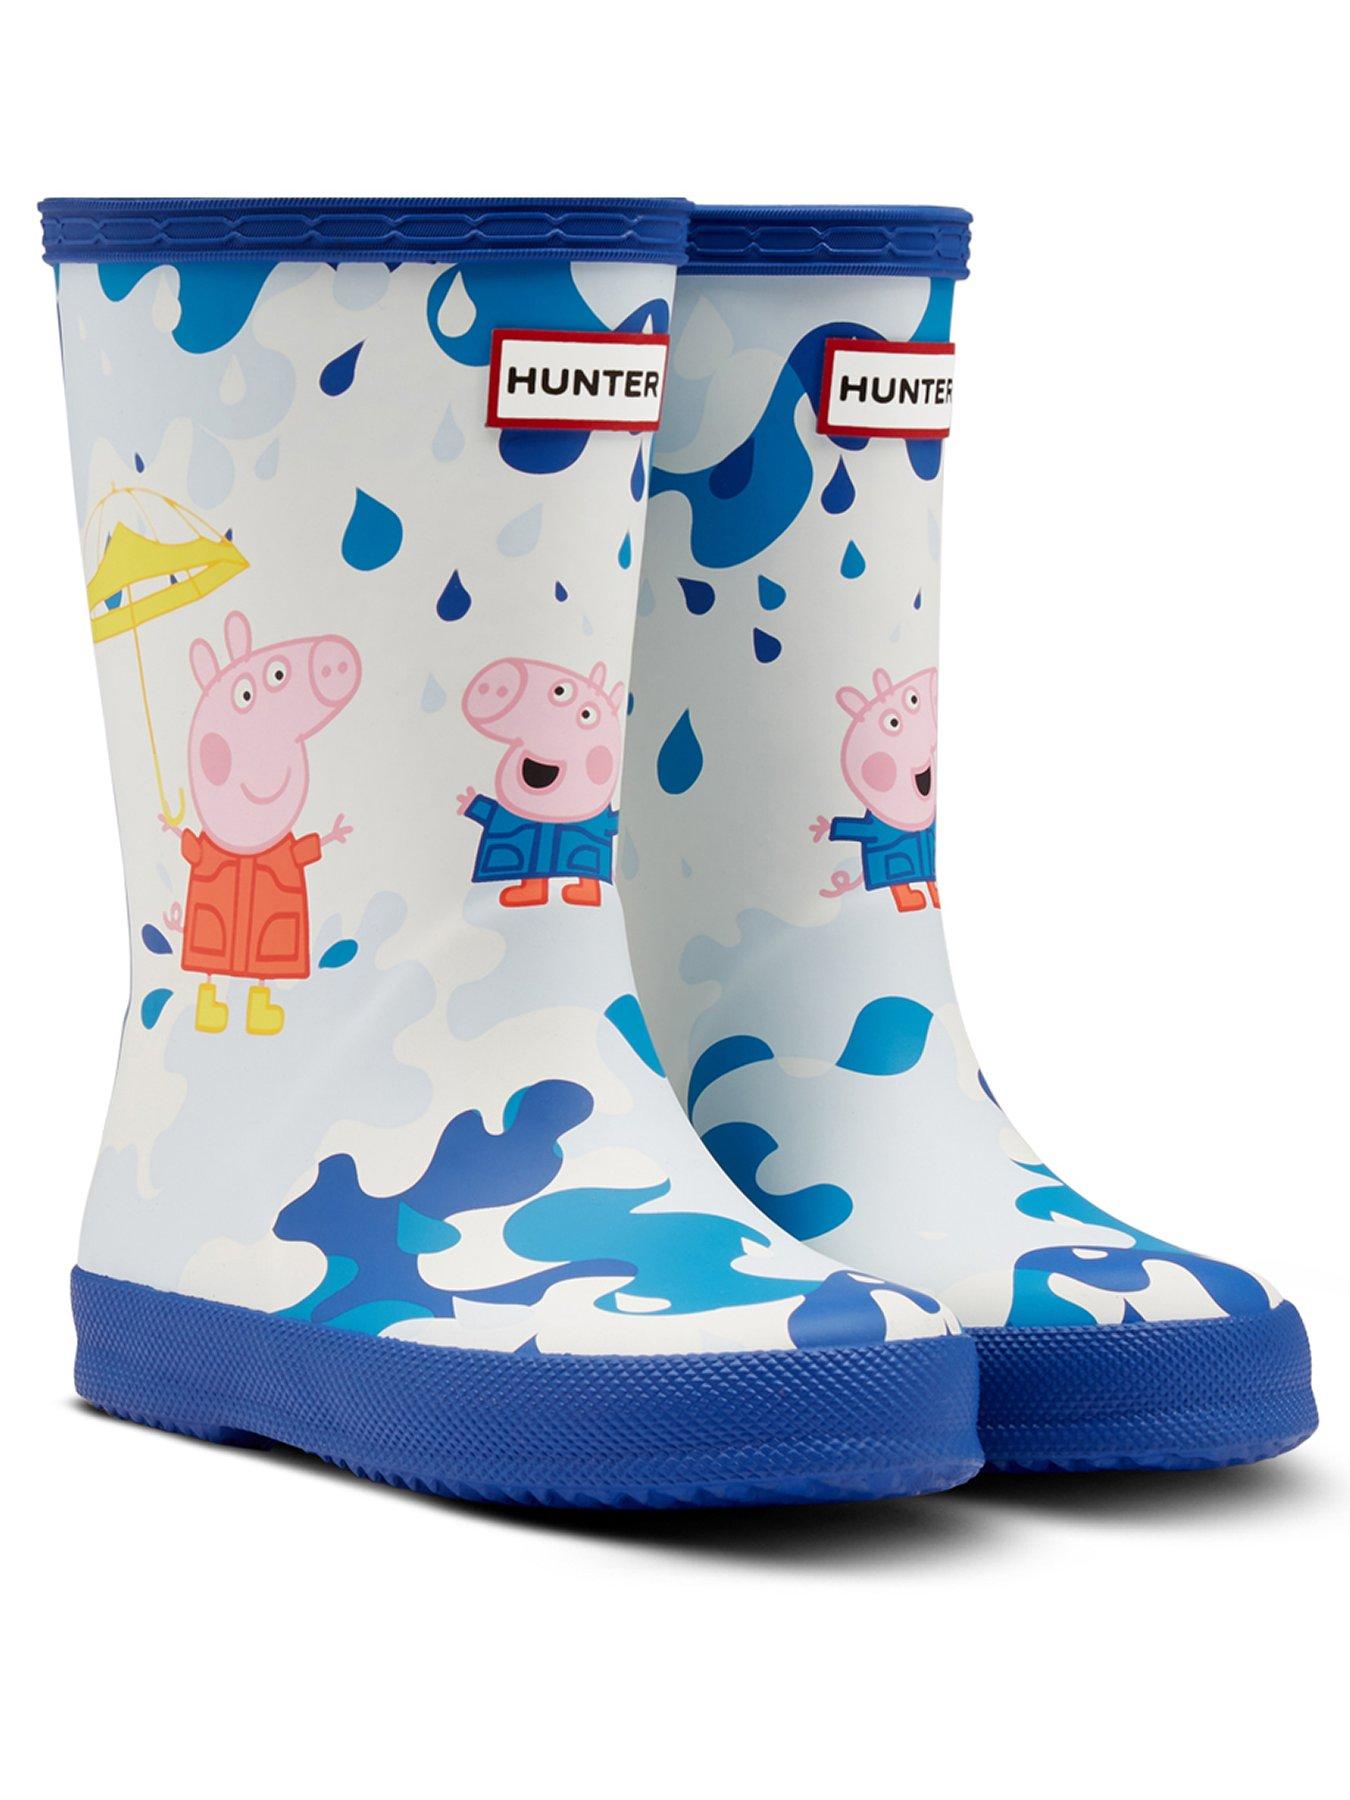 Shoes & boots Kids First Classic Peppa Pig Wellington Boots - Blue